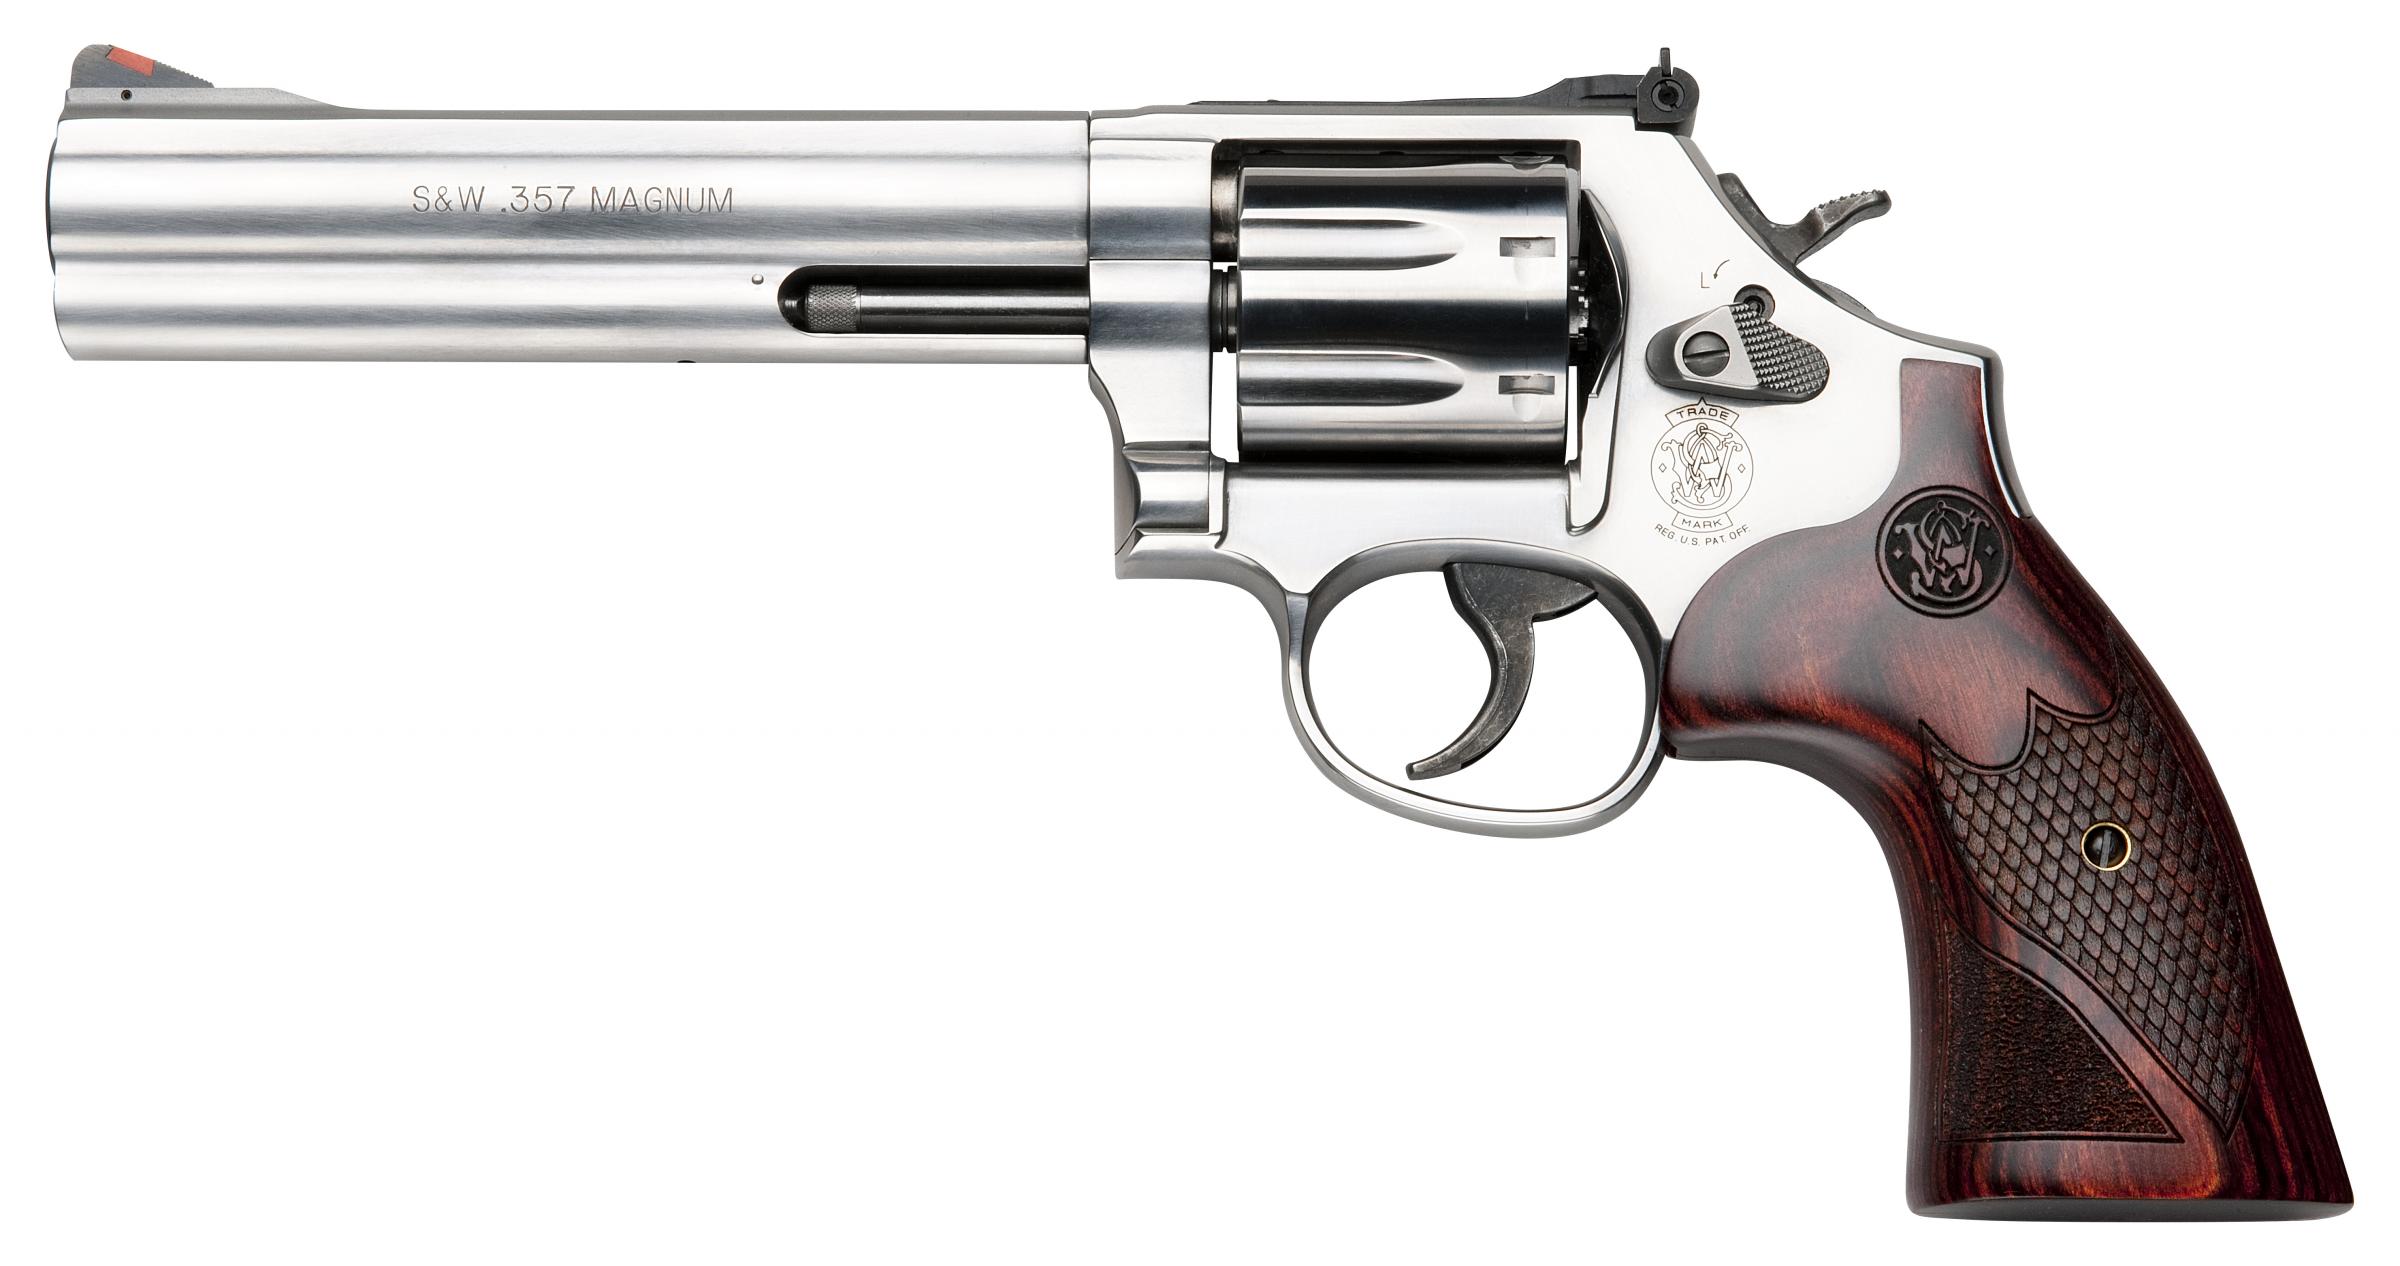 SMITH & WESSON MODEL 686 DELUXE 357 Magnum